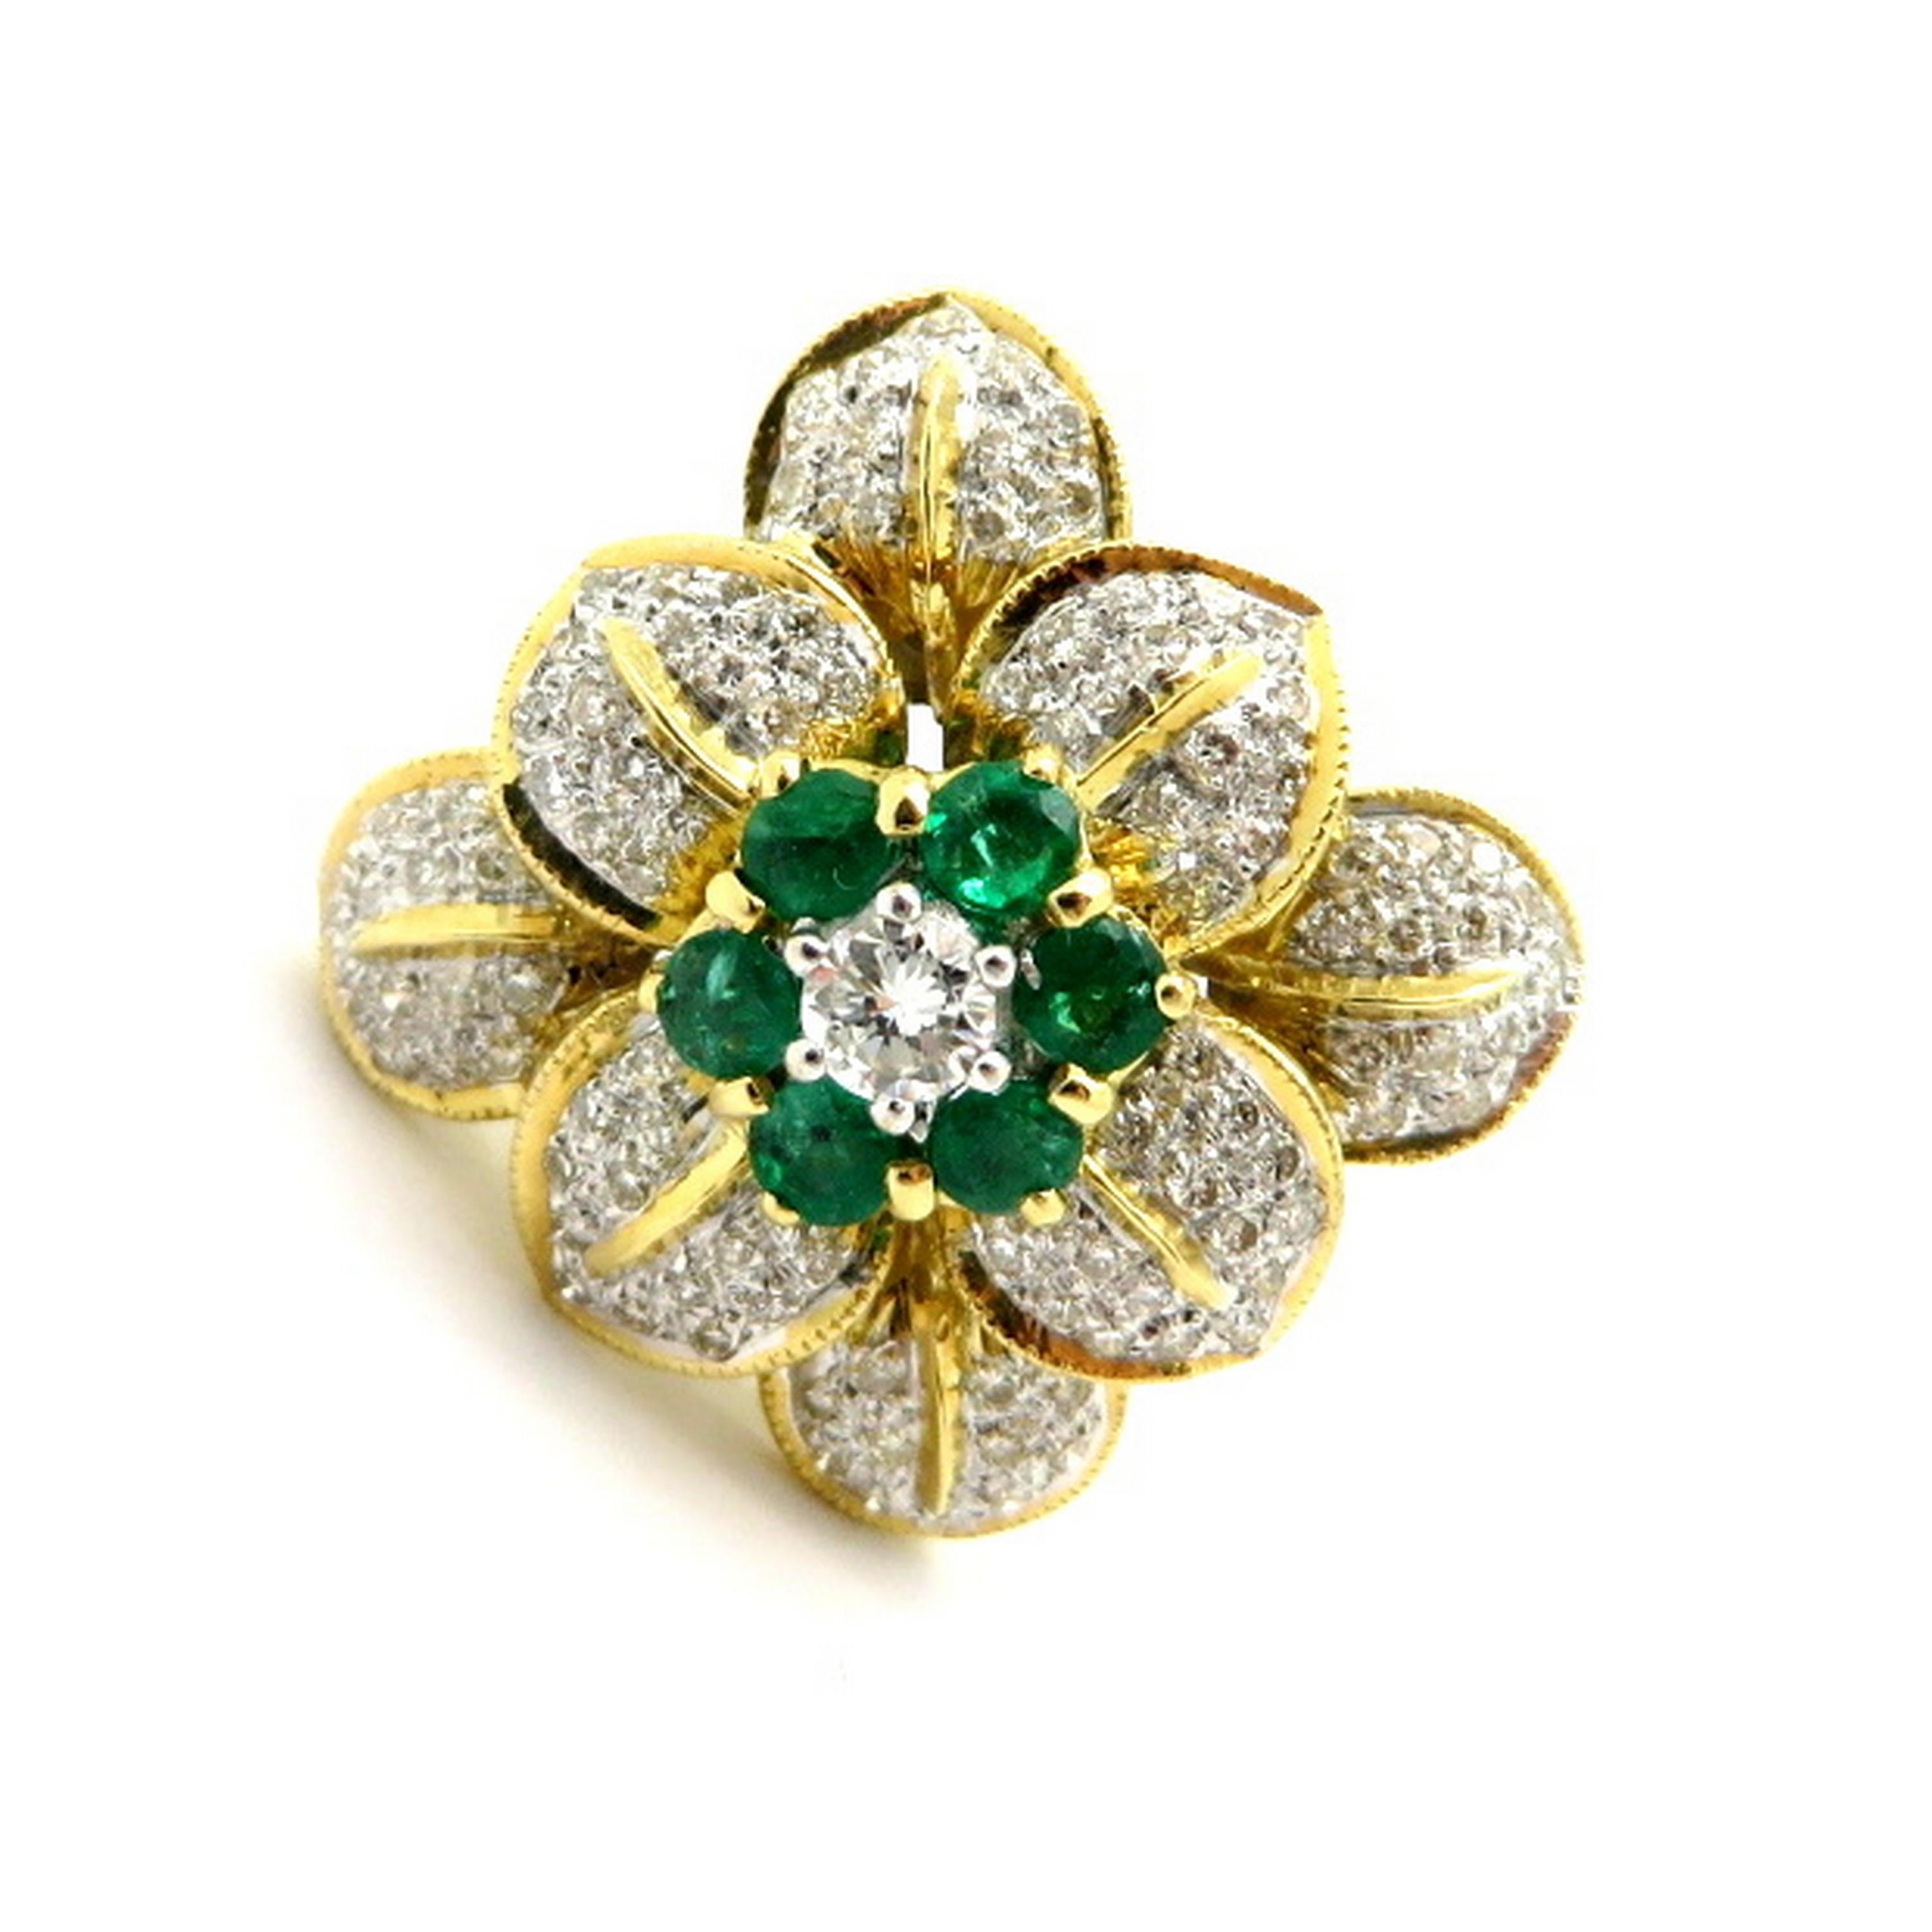 Estate 18K yellow gold flower emerald and diamond fashion ring. Showcasing 104 pave set round brilliant cut diamonds weighing a combined total of approximately 0.77 carats. Diamond grading: color grade: G – H. Clarity grade: VS1 – VS2. It is a